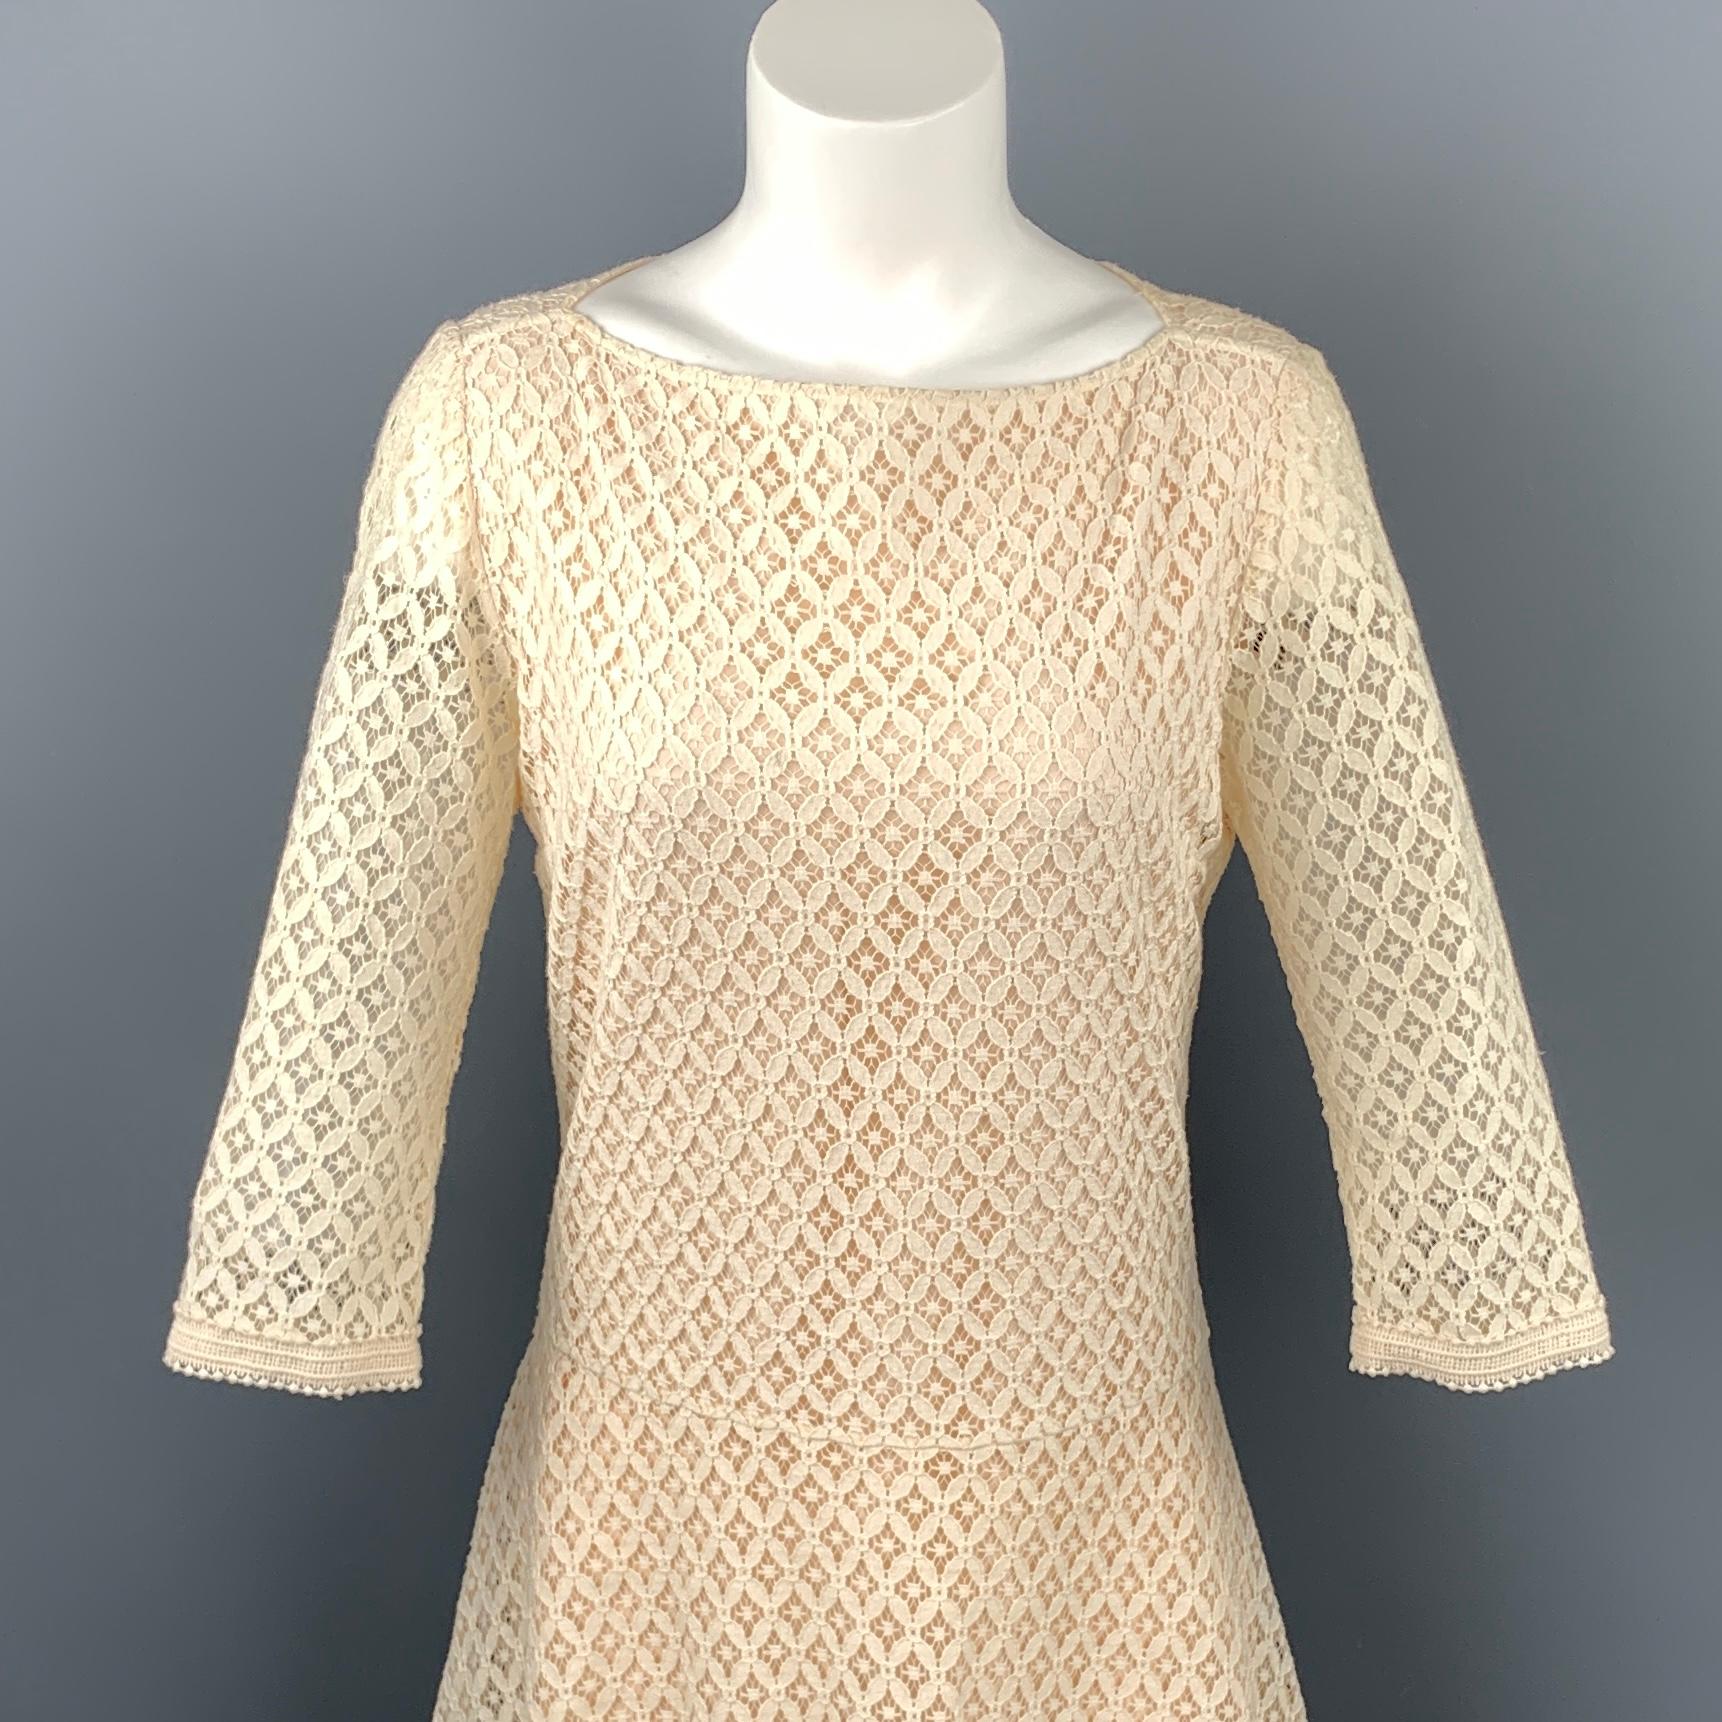 SEE by CHLOE dress comes in a cream lace cotton / nylon with a slip liner featuring a wide neck, 3/4 sleeves, and a elastic waistband.

Good Pre-Owned Condition.
Marked: F 34 / I 38 / USA 2 / GB 6 / D 34

Measurements:

Shoulder: 15 in.
Bust: 36 in.